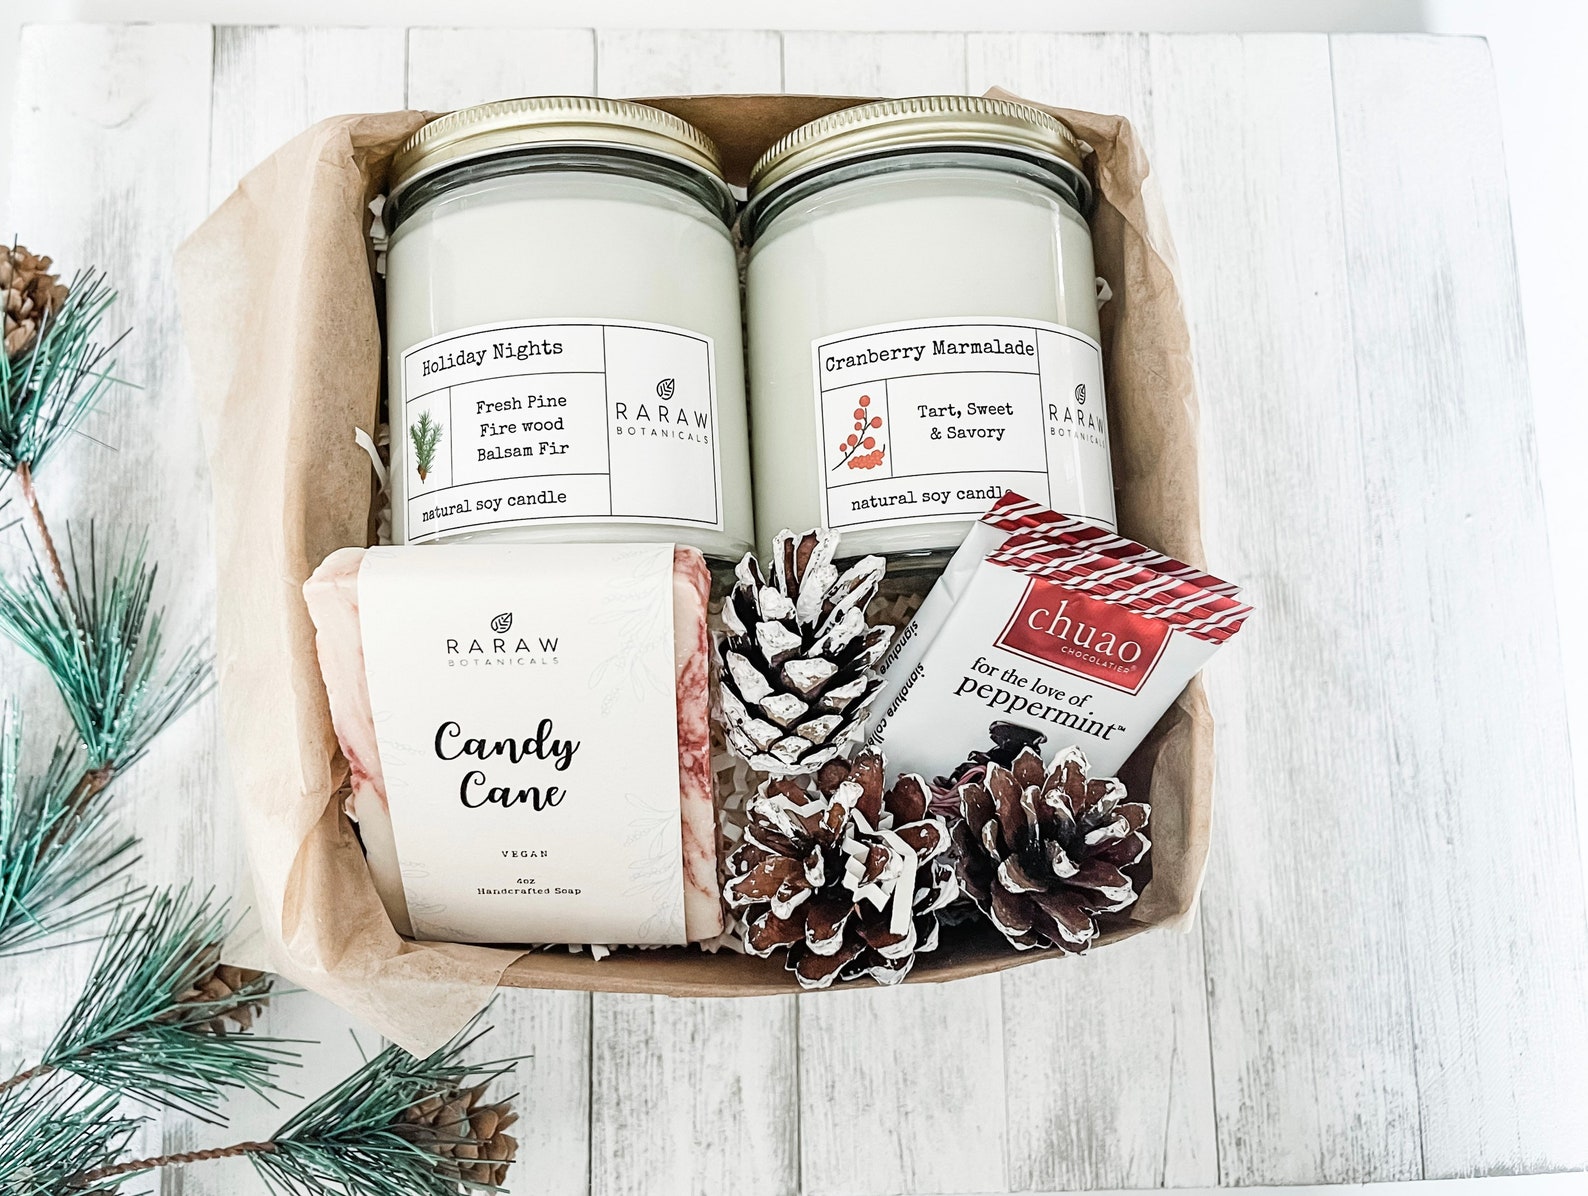 holiday gift box contents - candles - soap - chocolate - pine cones